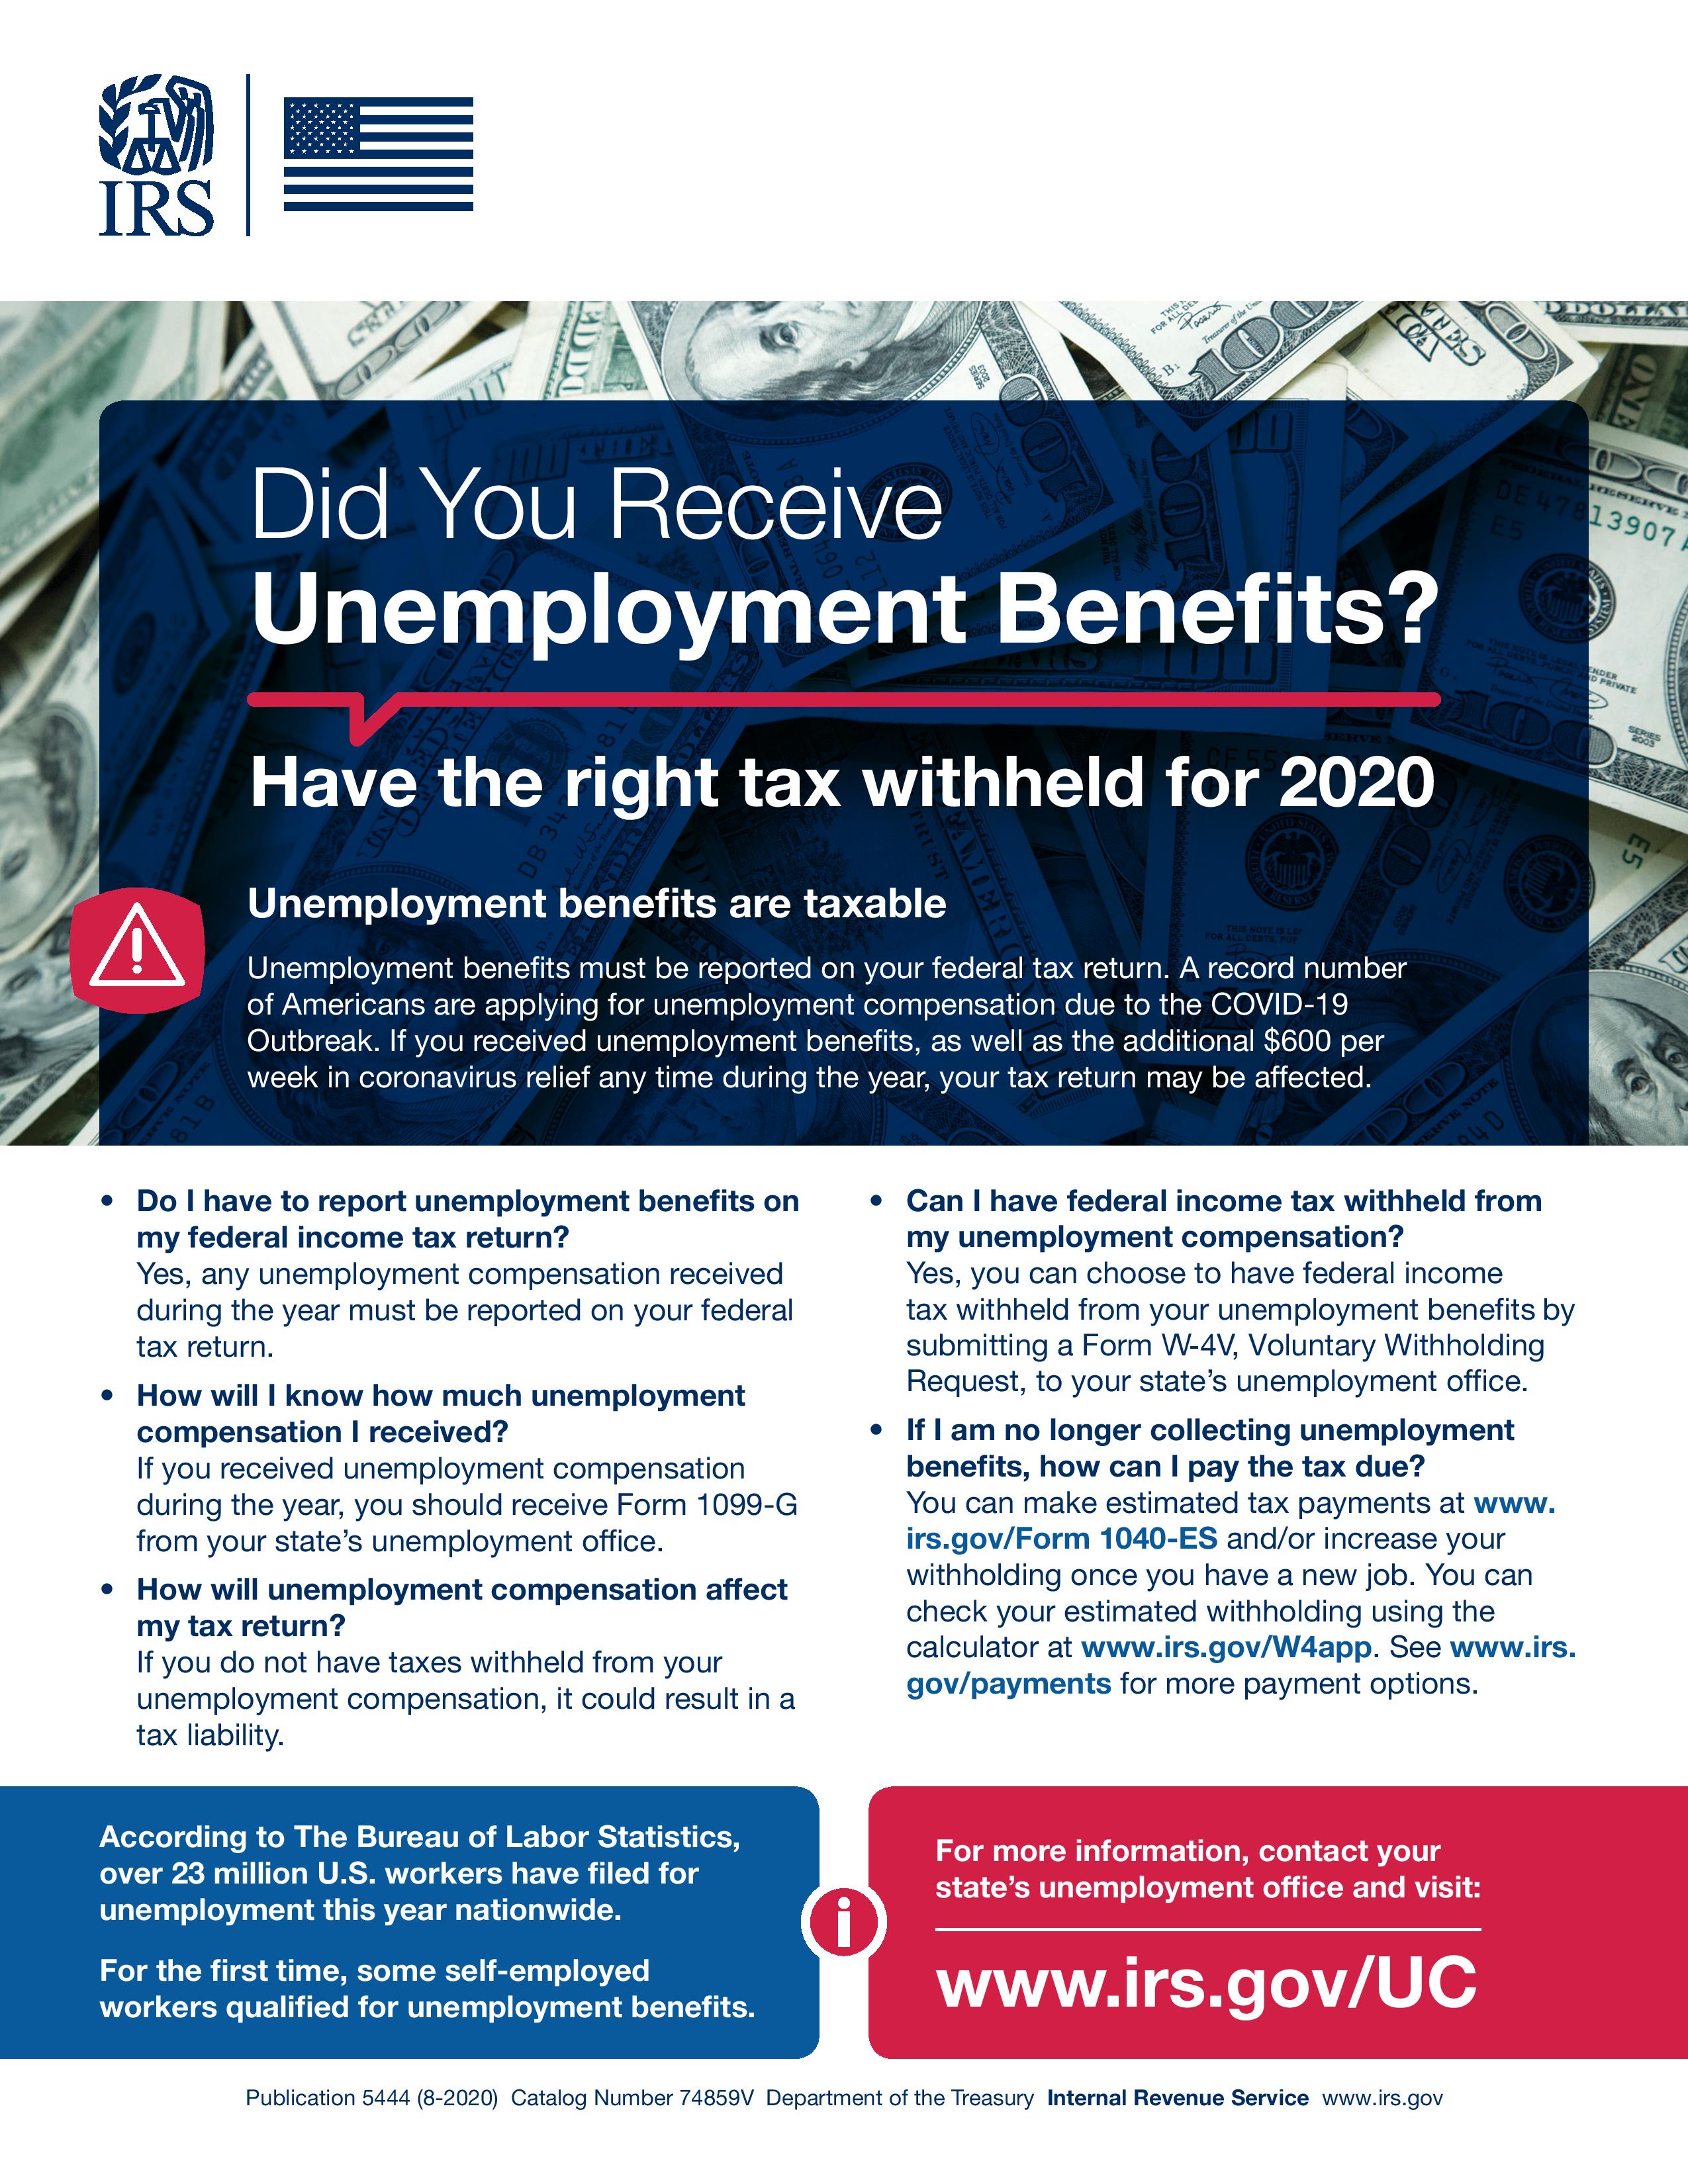 IRS POSTER